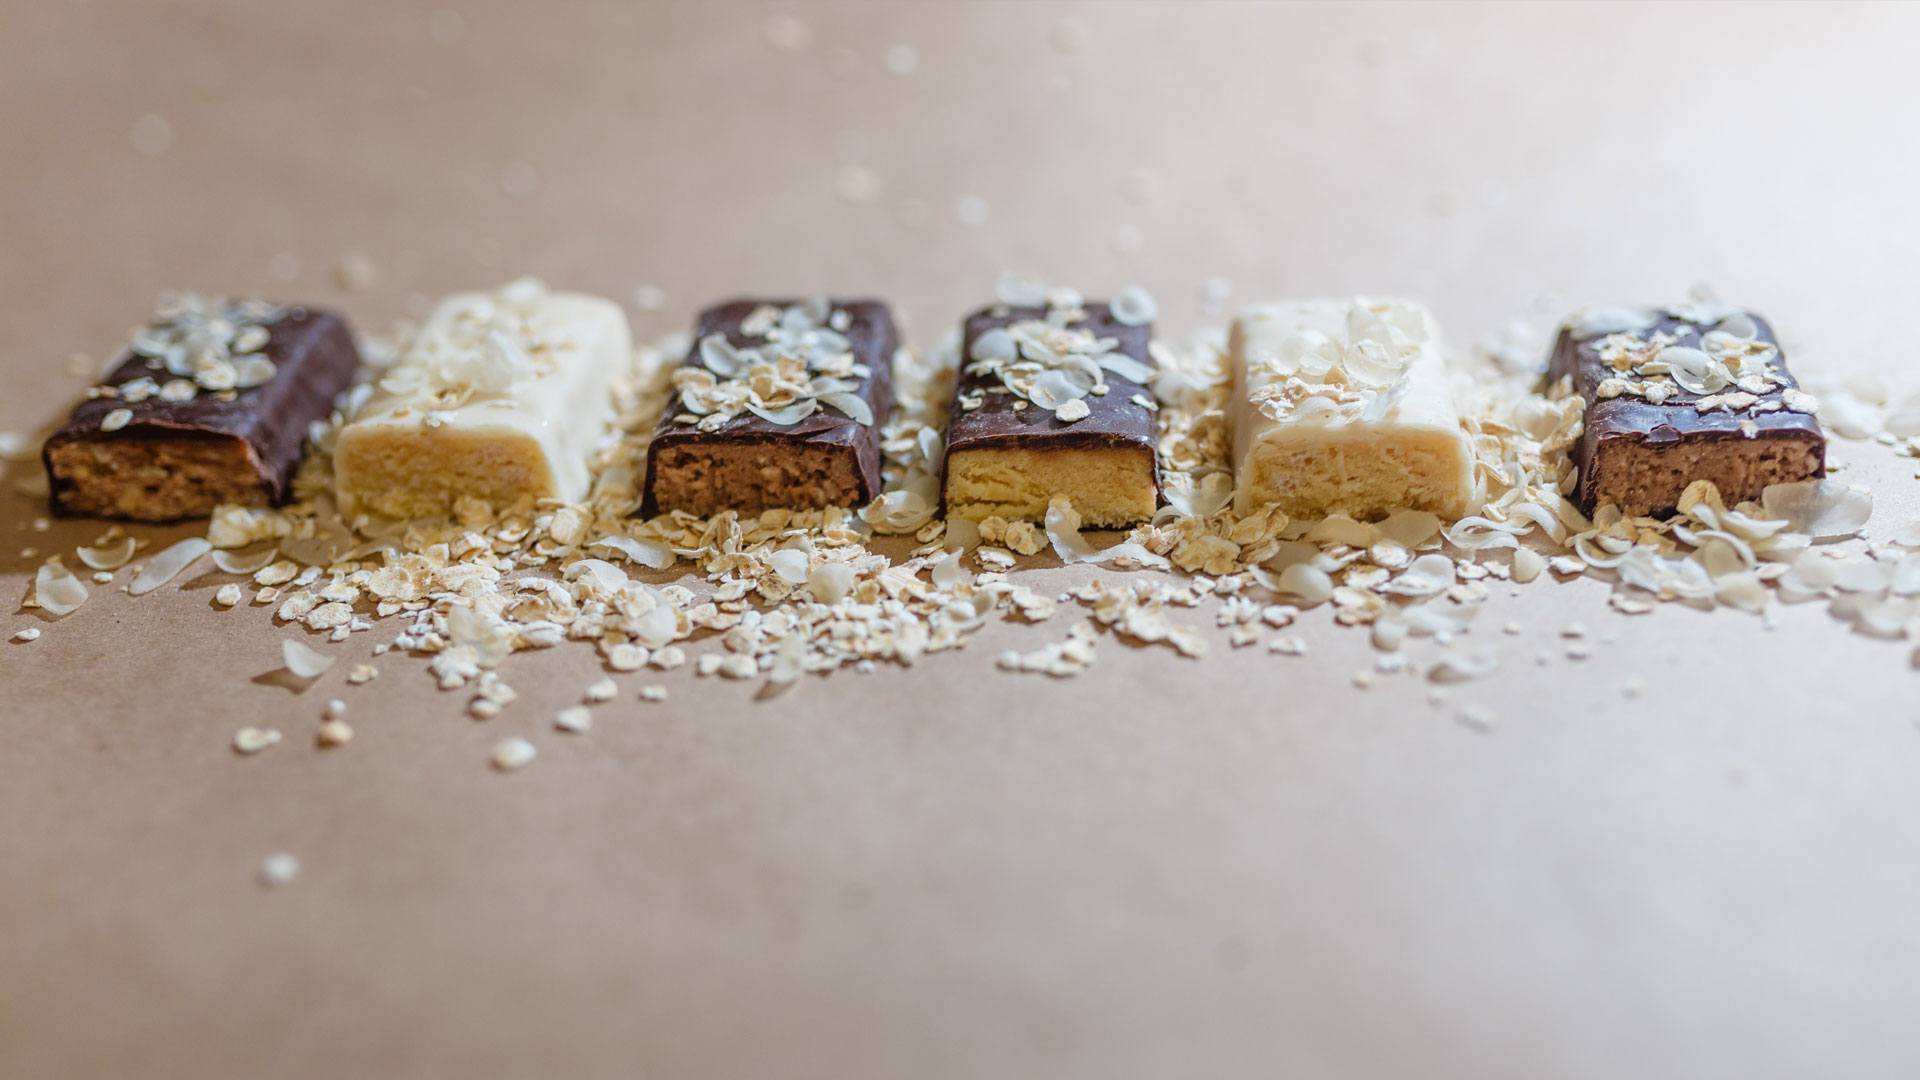 Six protein bars lay side by side. A good protein bar rule is to stay around 200-300 calories. 